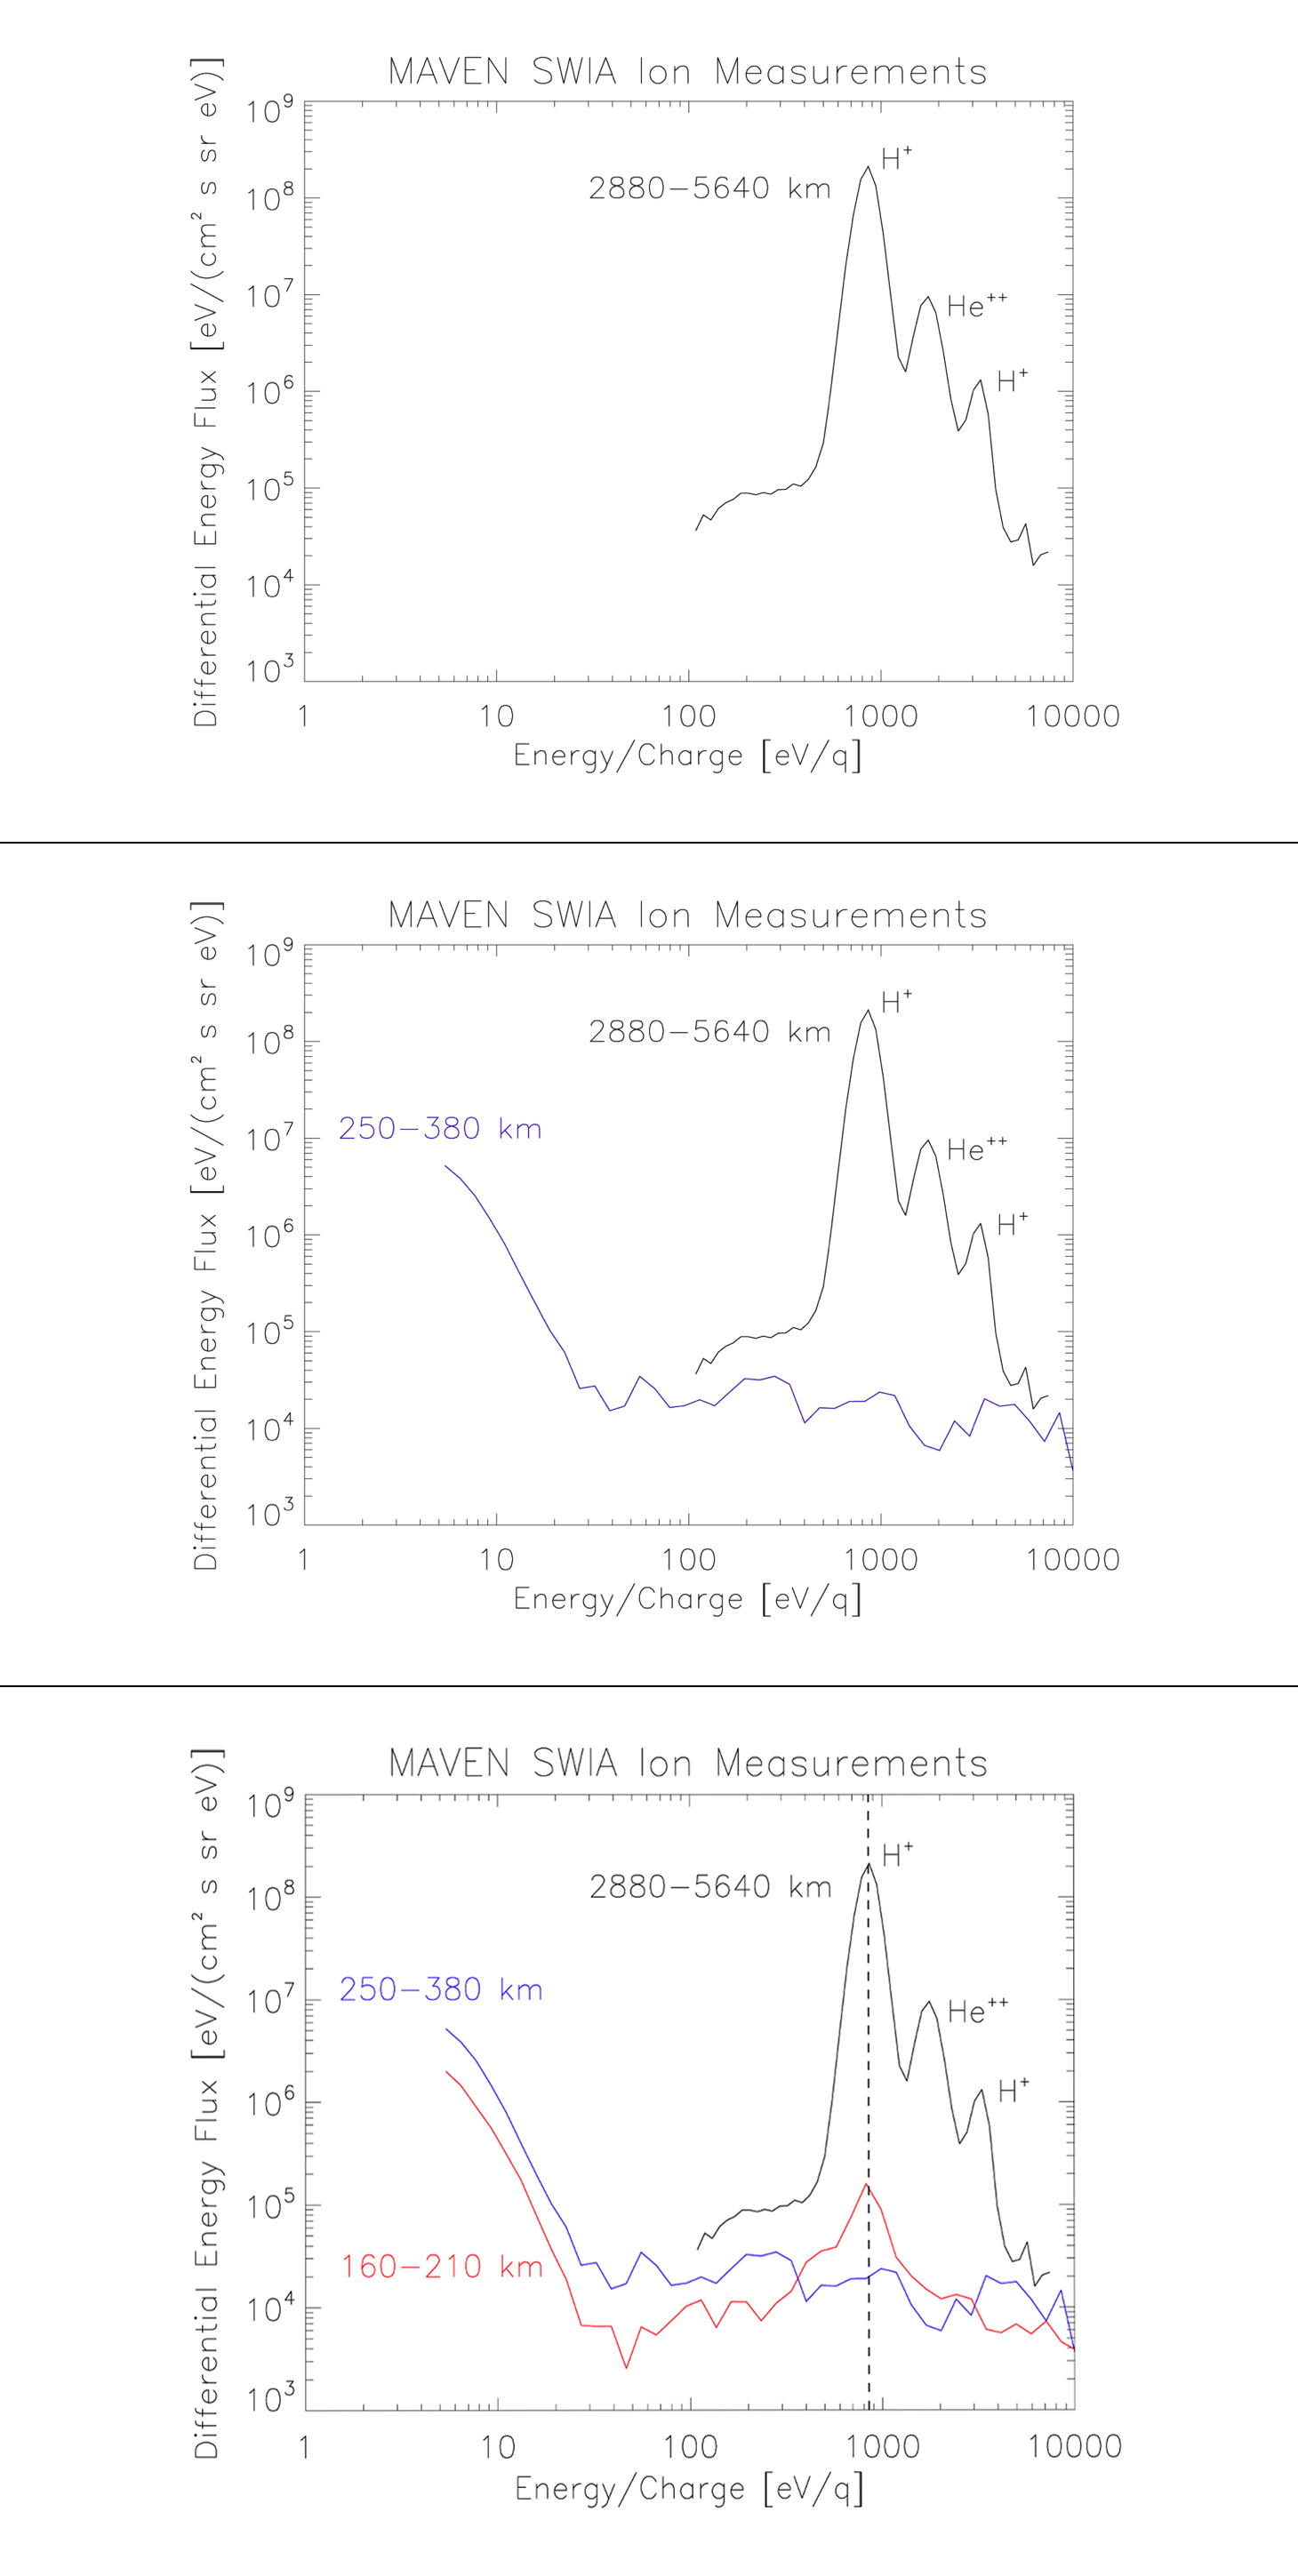 SWIA measurements of the solar wind. At the highest altitudes (2,880 - 5,640 km), you can see the peaks at the correct energy/charge ratio for H+ and He++ in the free upstream solar wind. At intermediate altitudes (250 - 380 km), these peaks are not present, suggesting that the solar wind has not penetrated to these altitudes. However, the H+ peak shows up again at lower altitudes (160 - 210 km). (Courtesy Jasper Halekas/University of Iowa)